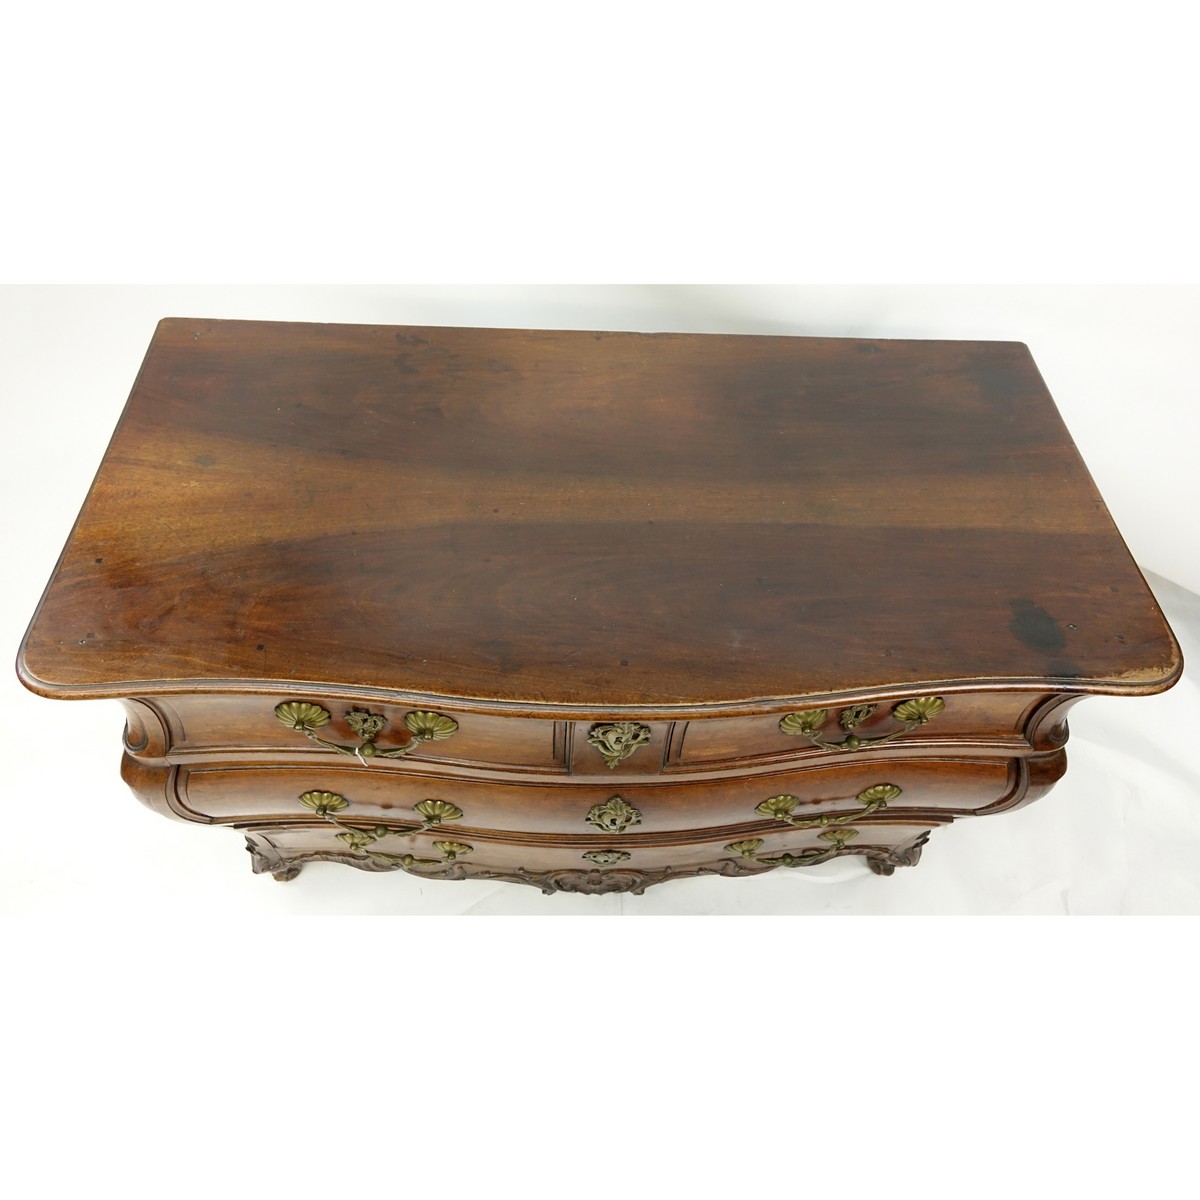 Good 18/19th Century Louis XV French Carved Walnut Commode en Tombeau. Two shaped single drawers with two large drawers.